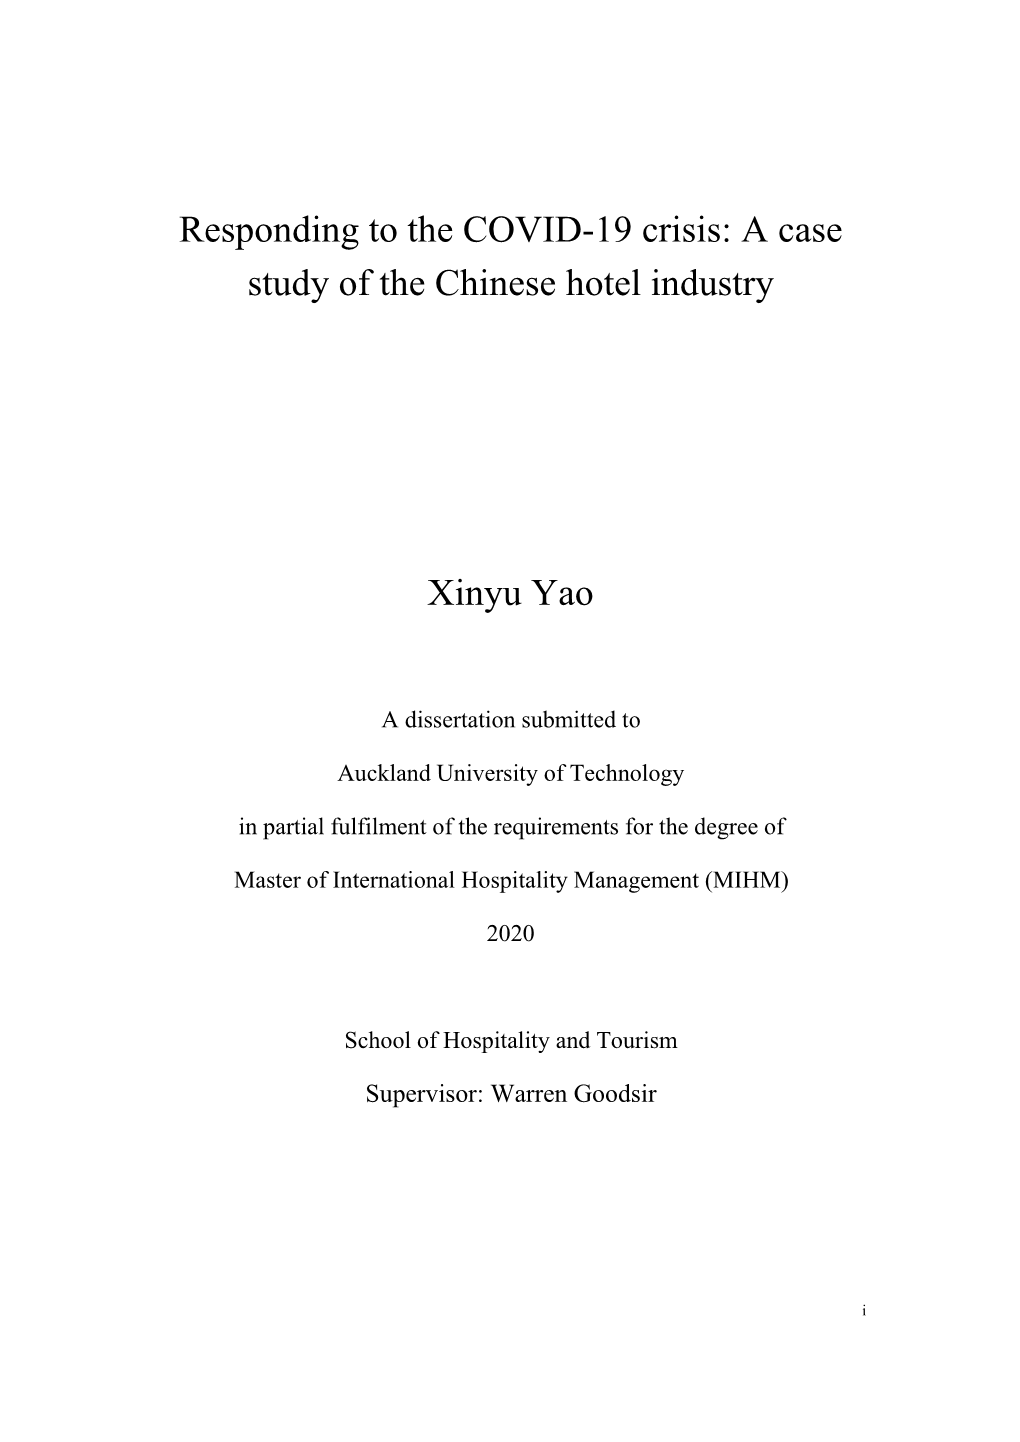 Dissertation Submitted To